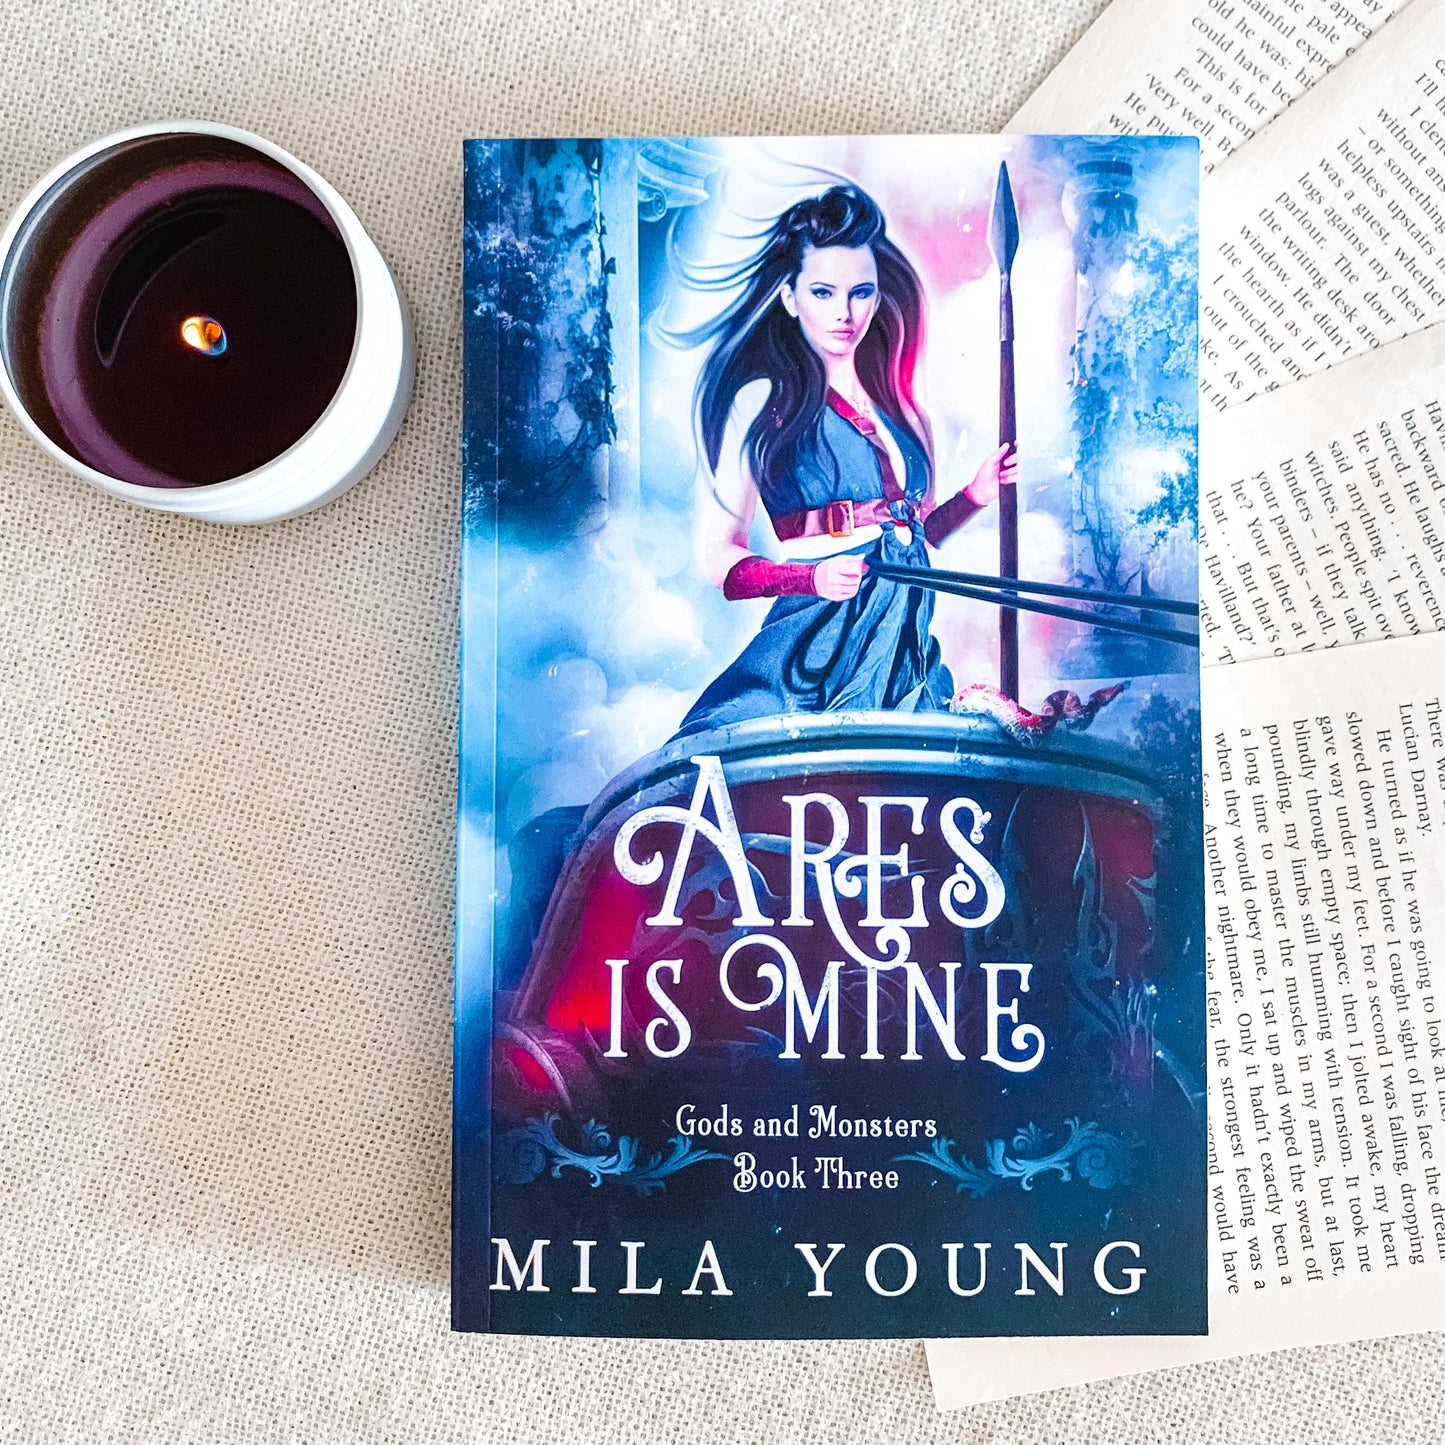 Gods and Monsters Series by Mila Young